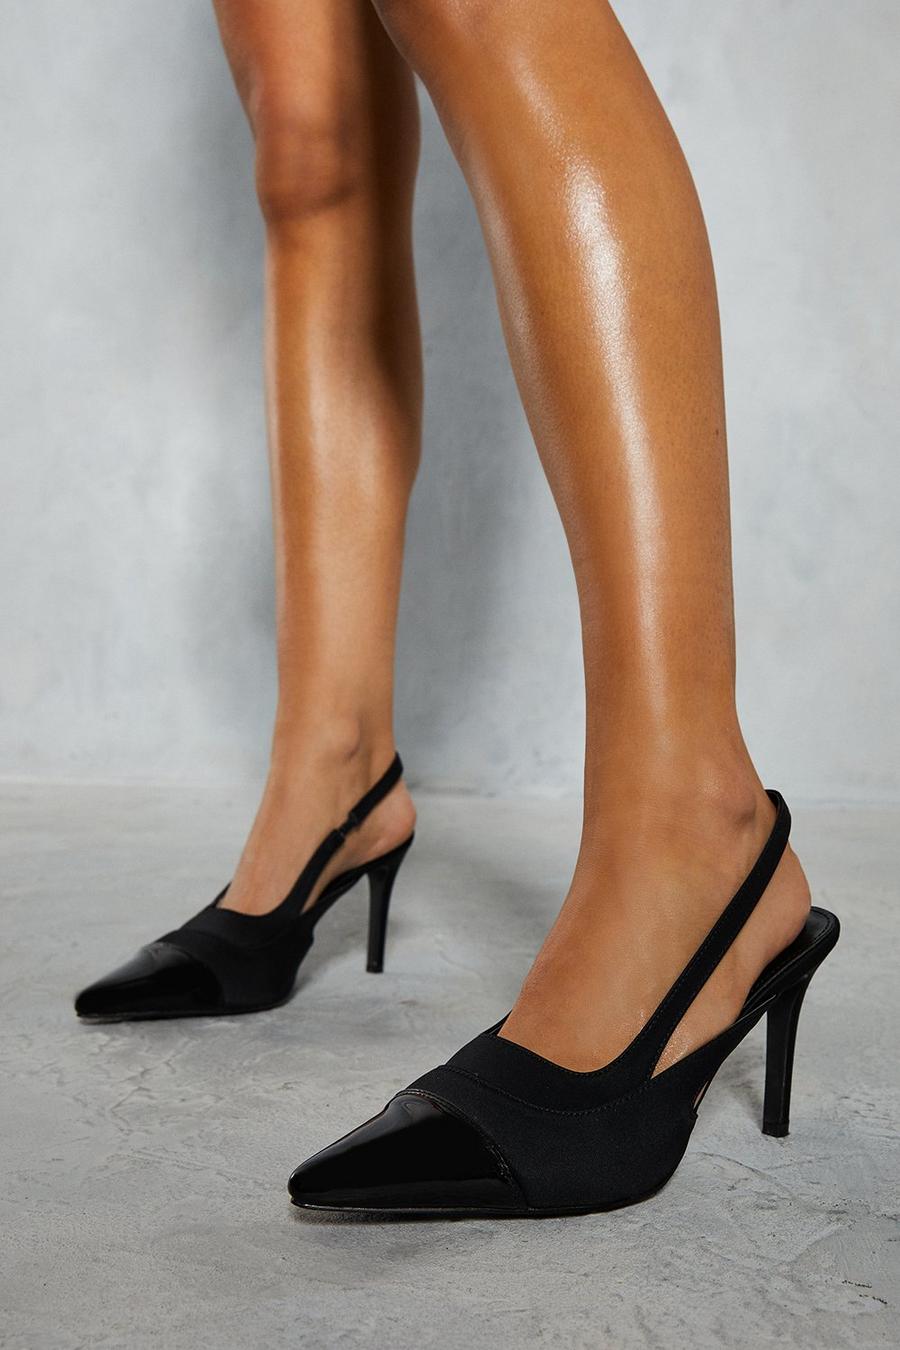 Black Patent Toe Overlay Pointed Heels